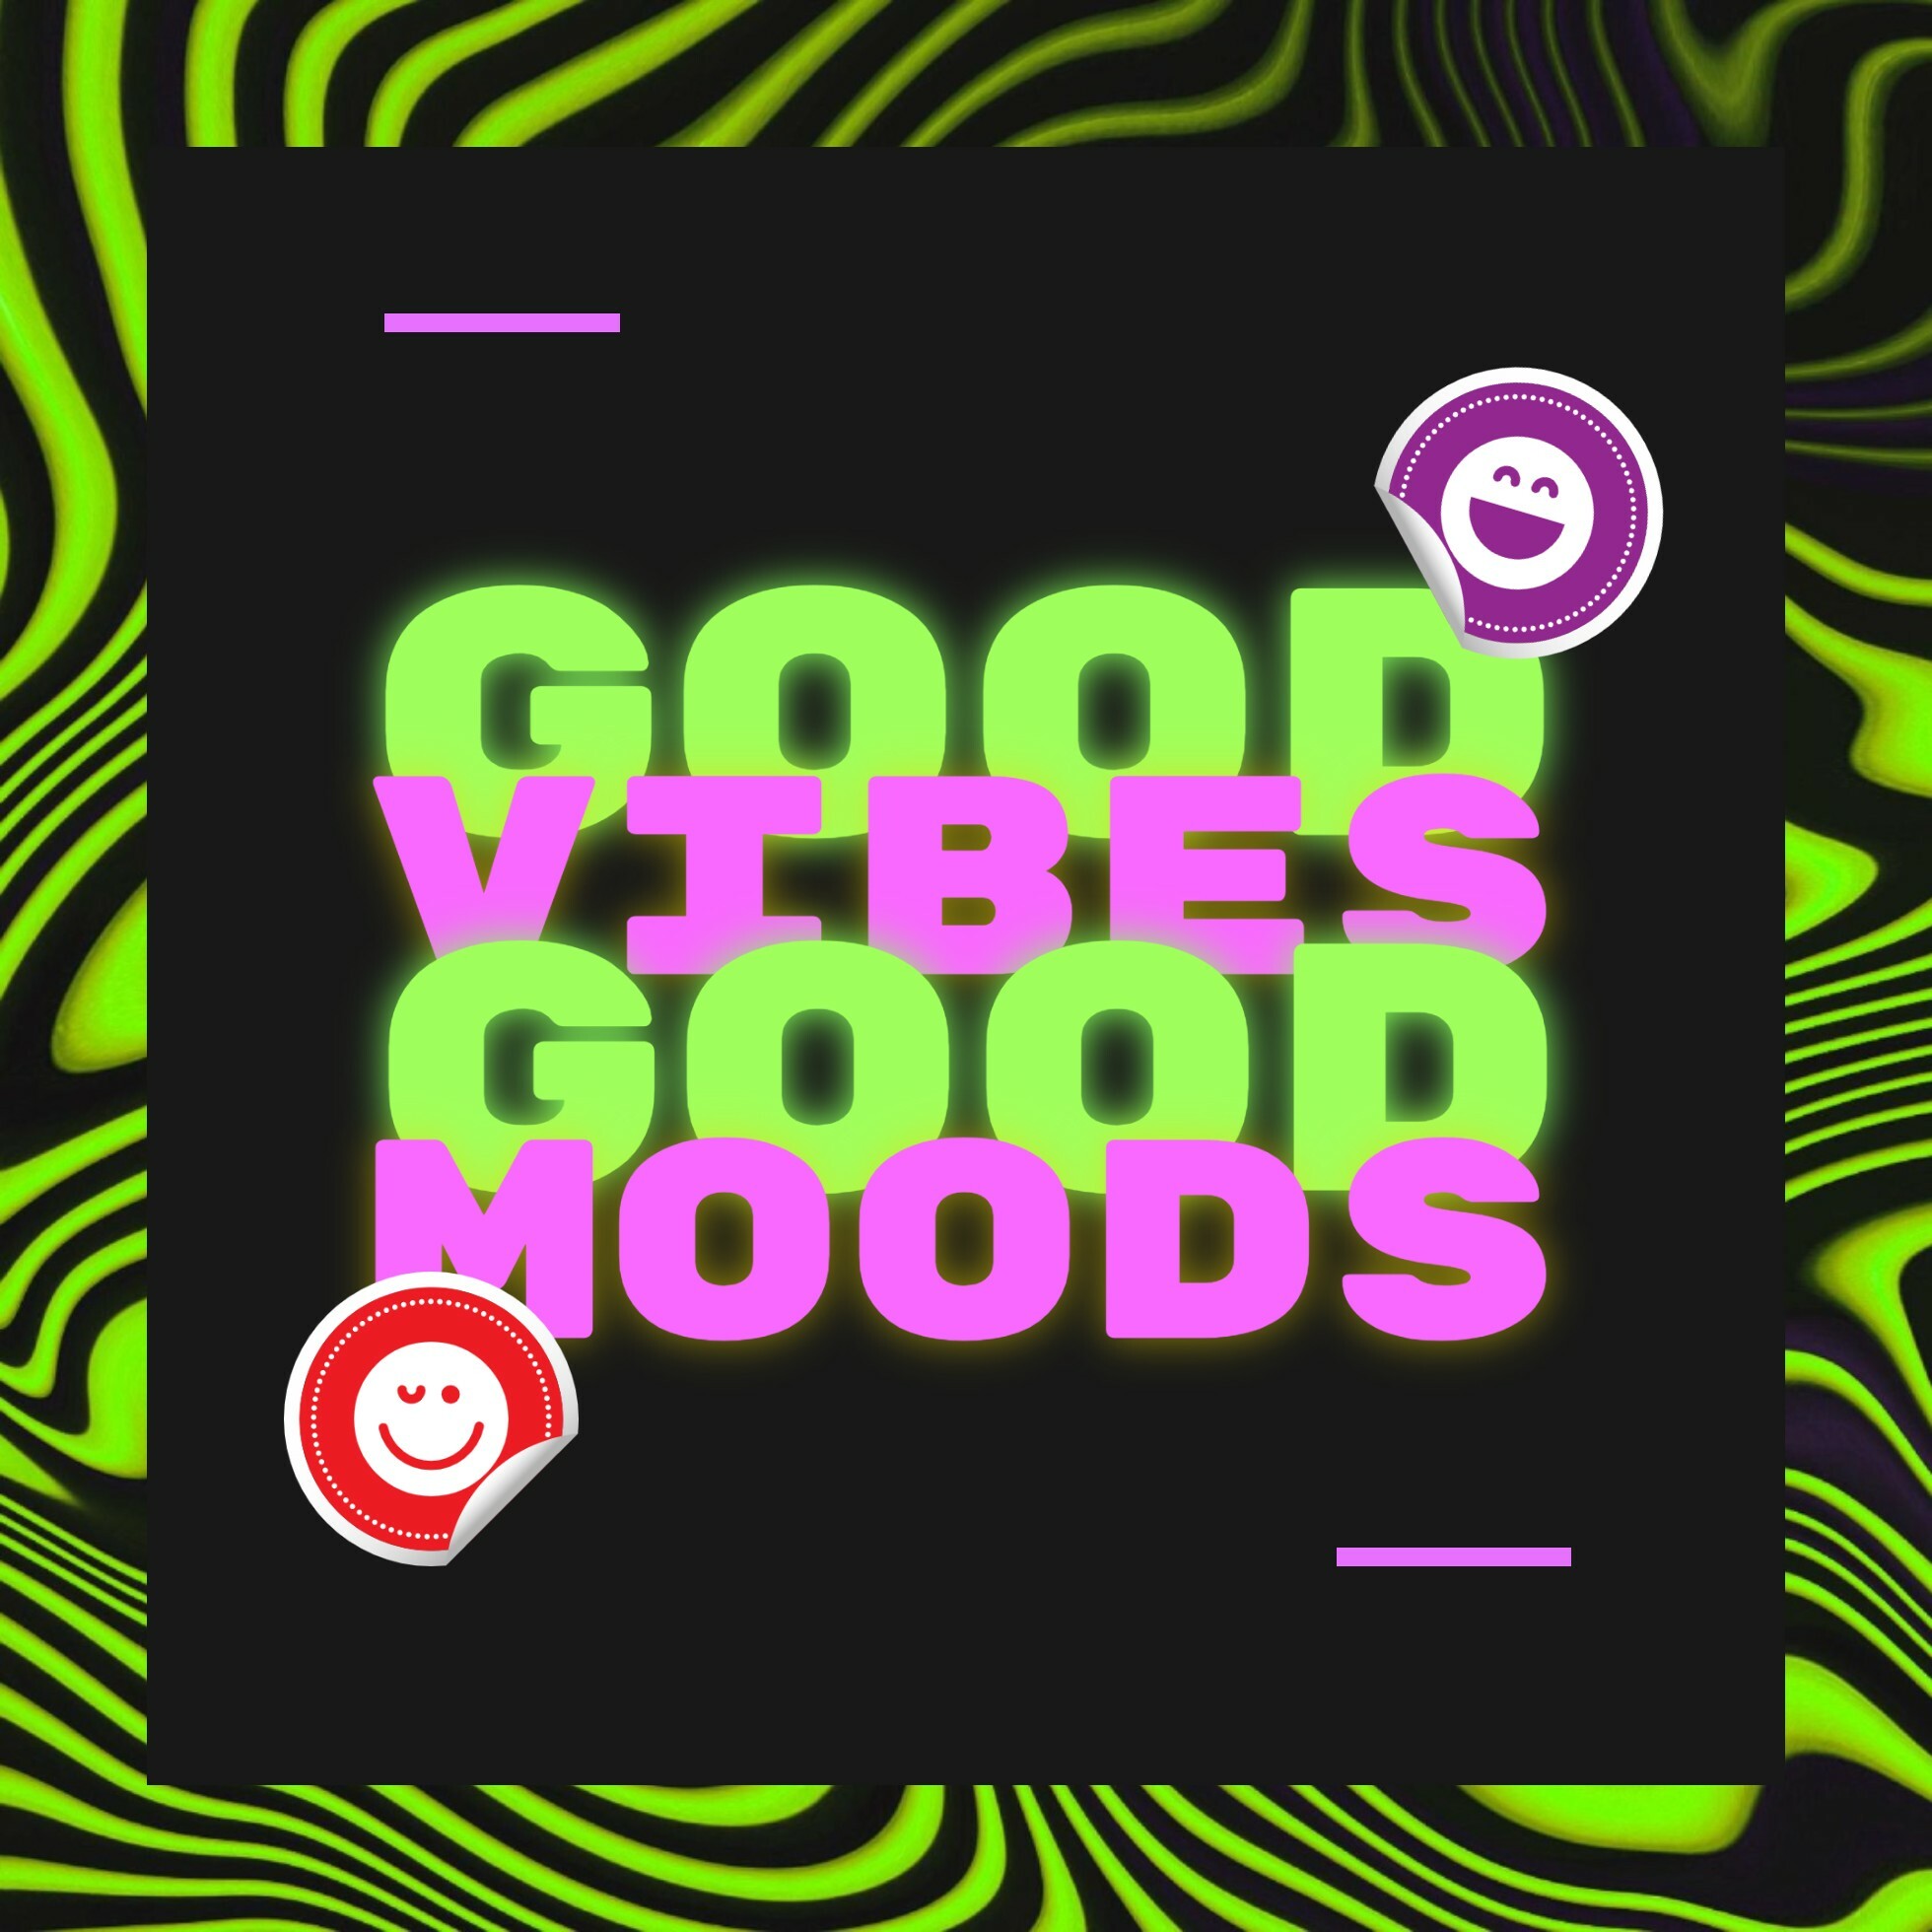 Green and Pink Retro Instagram Post with Glowing Good Vibes Good Moods Text template